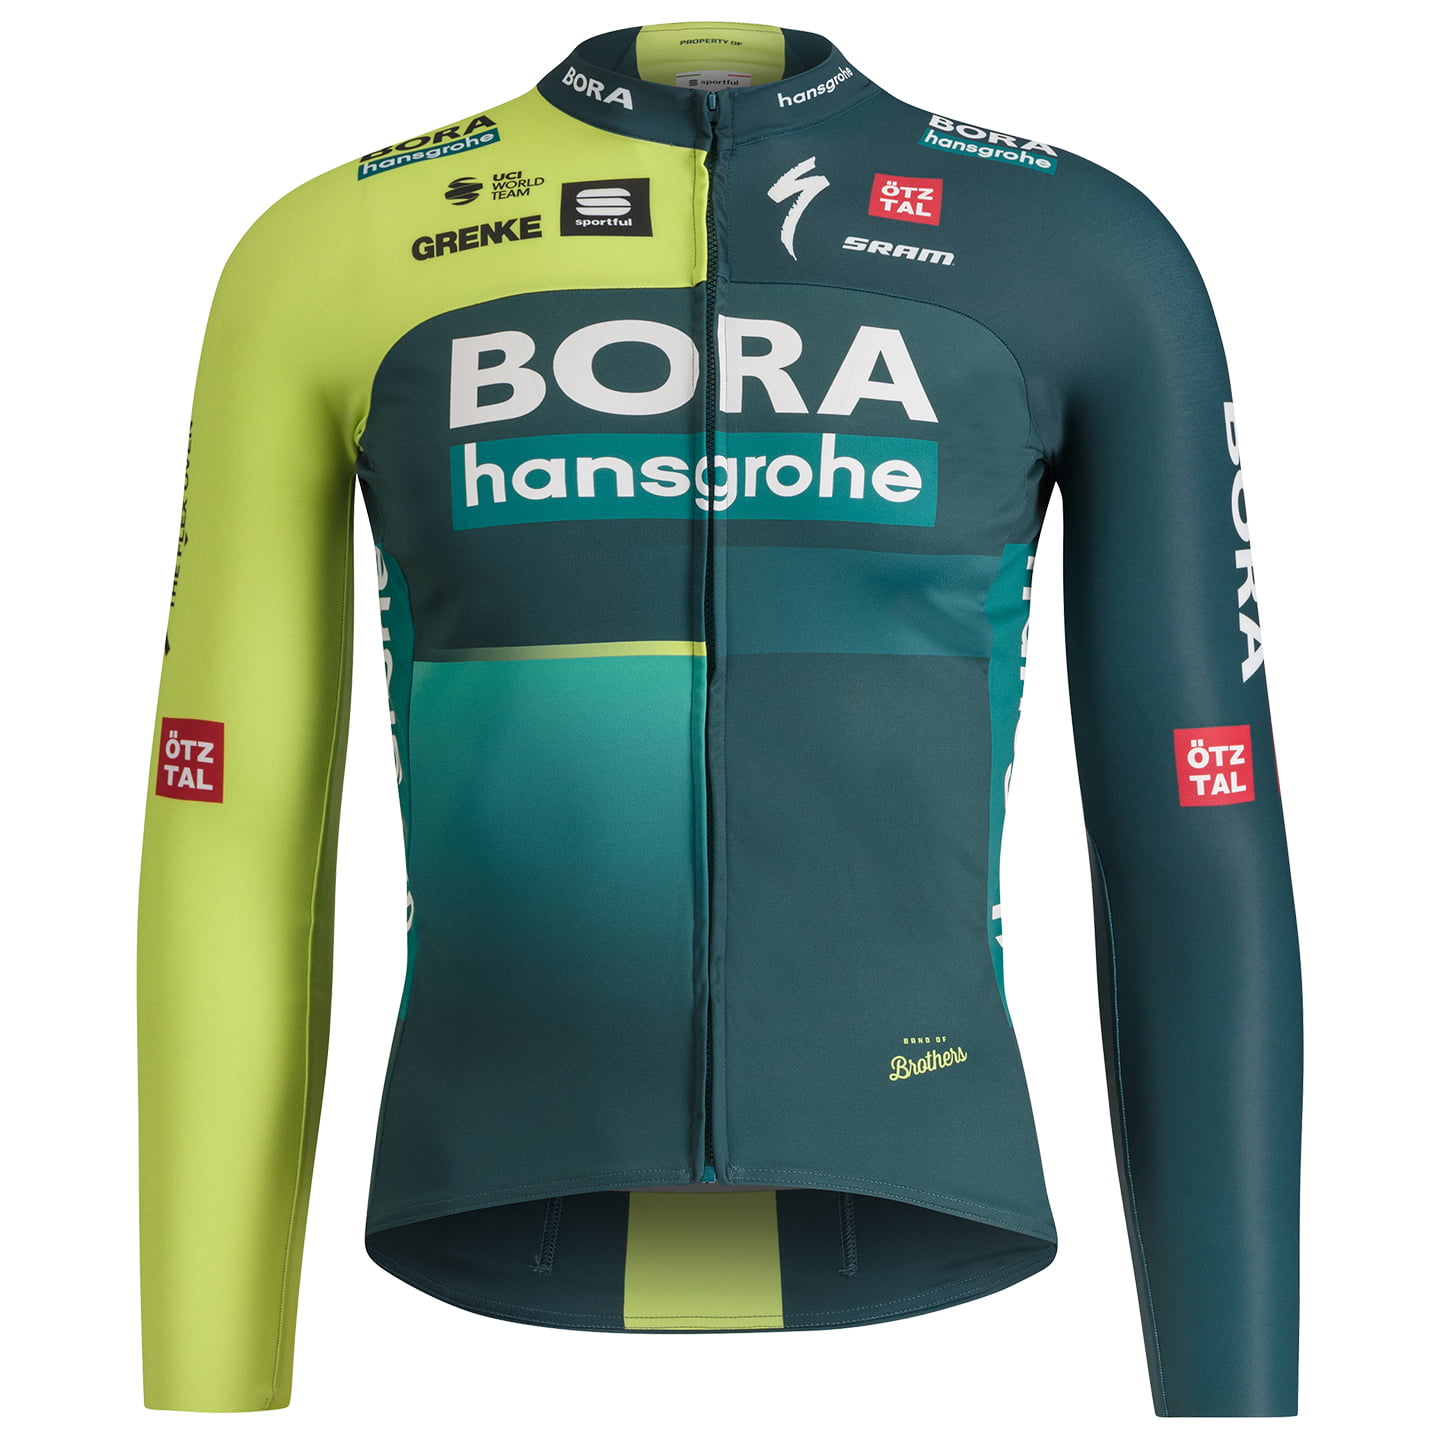 BORA-hansgrohe 2024 Long Sleeve Jersey, for men, size S, Cycling jersey, Cycling clothing